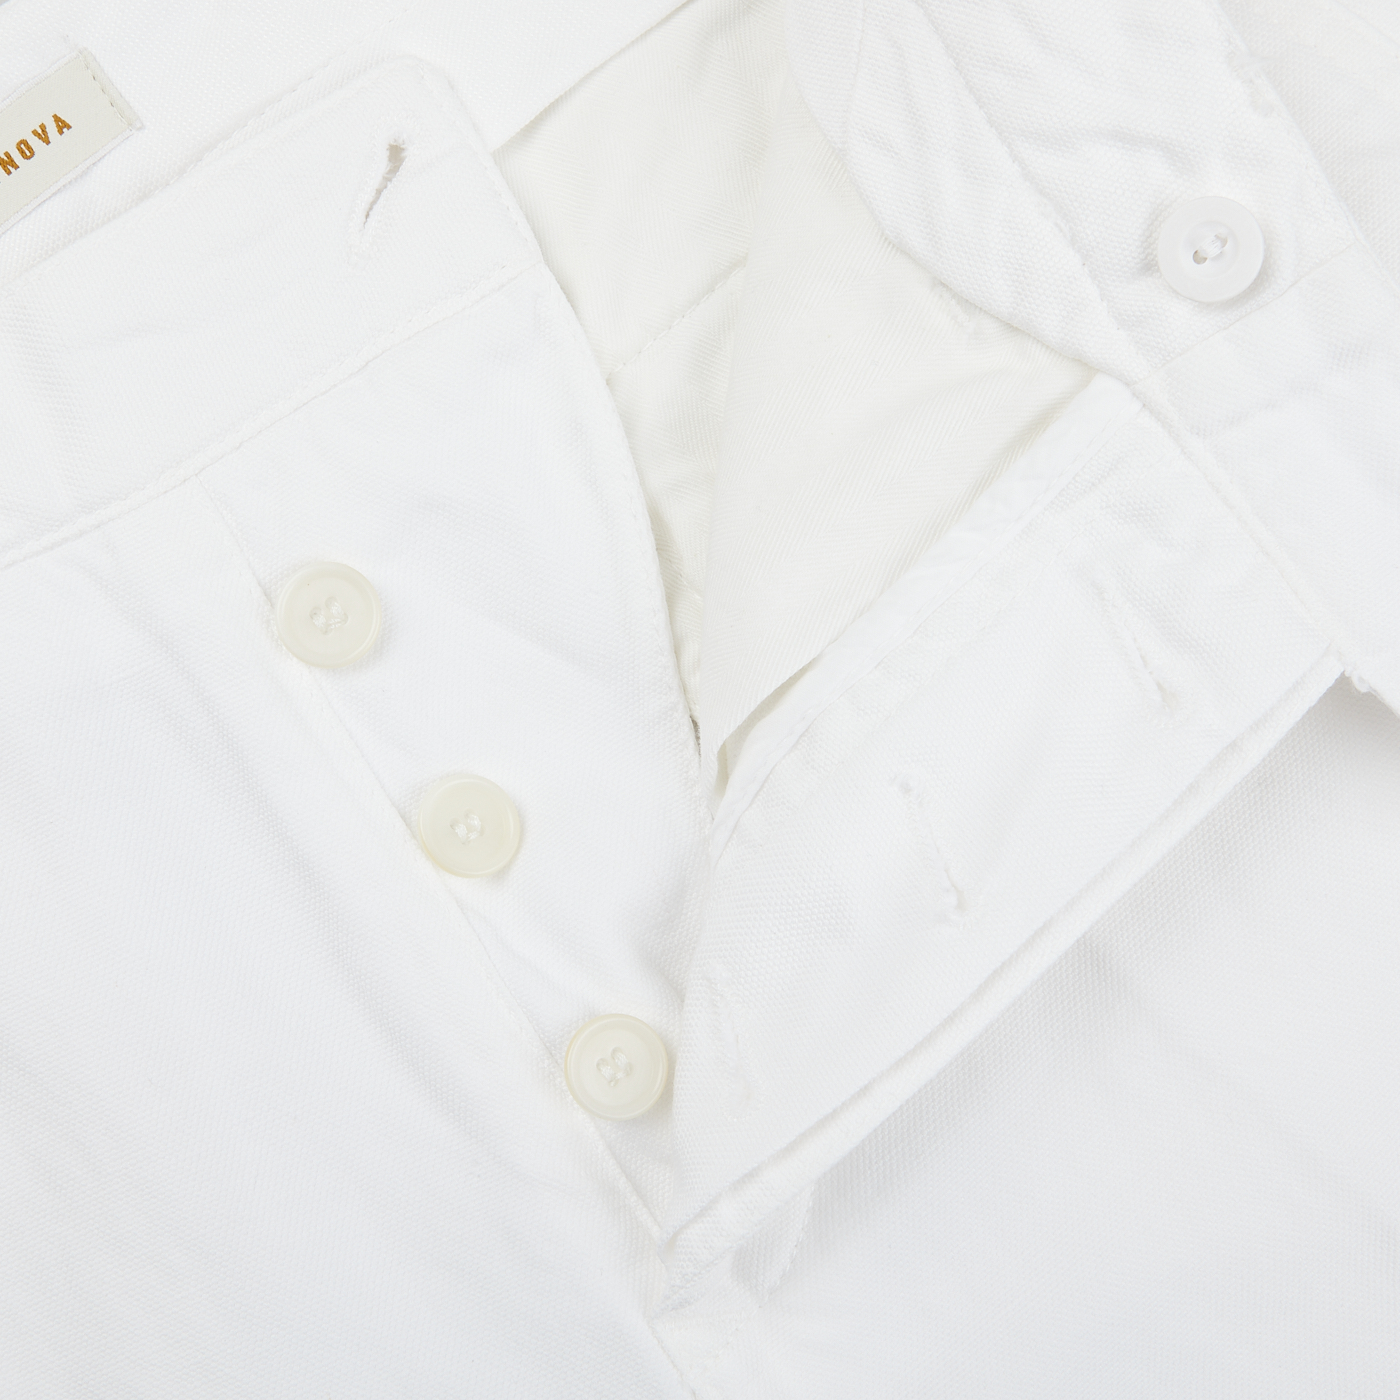 A close up image of Tela Genova White Cotton Linen Bermuda Shorts with buttons.